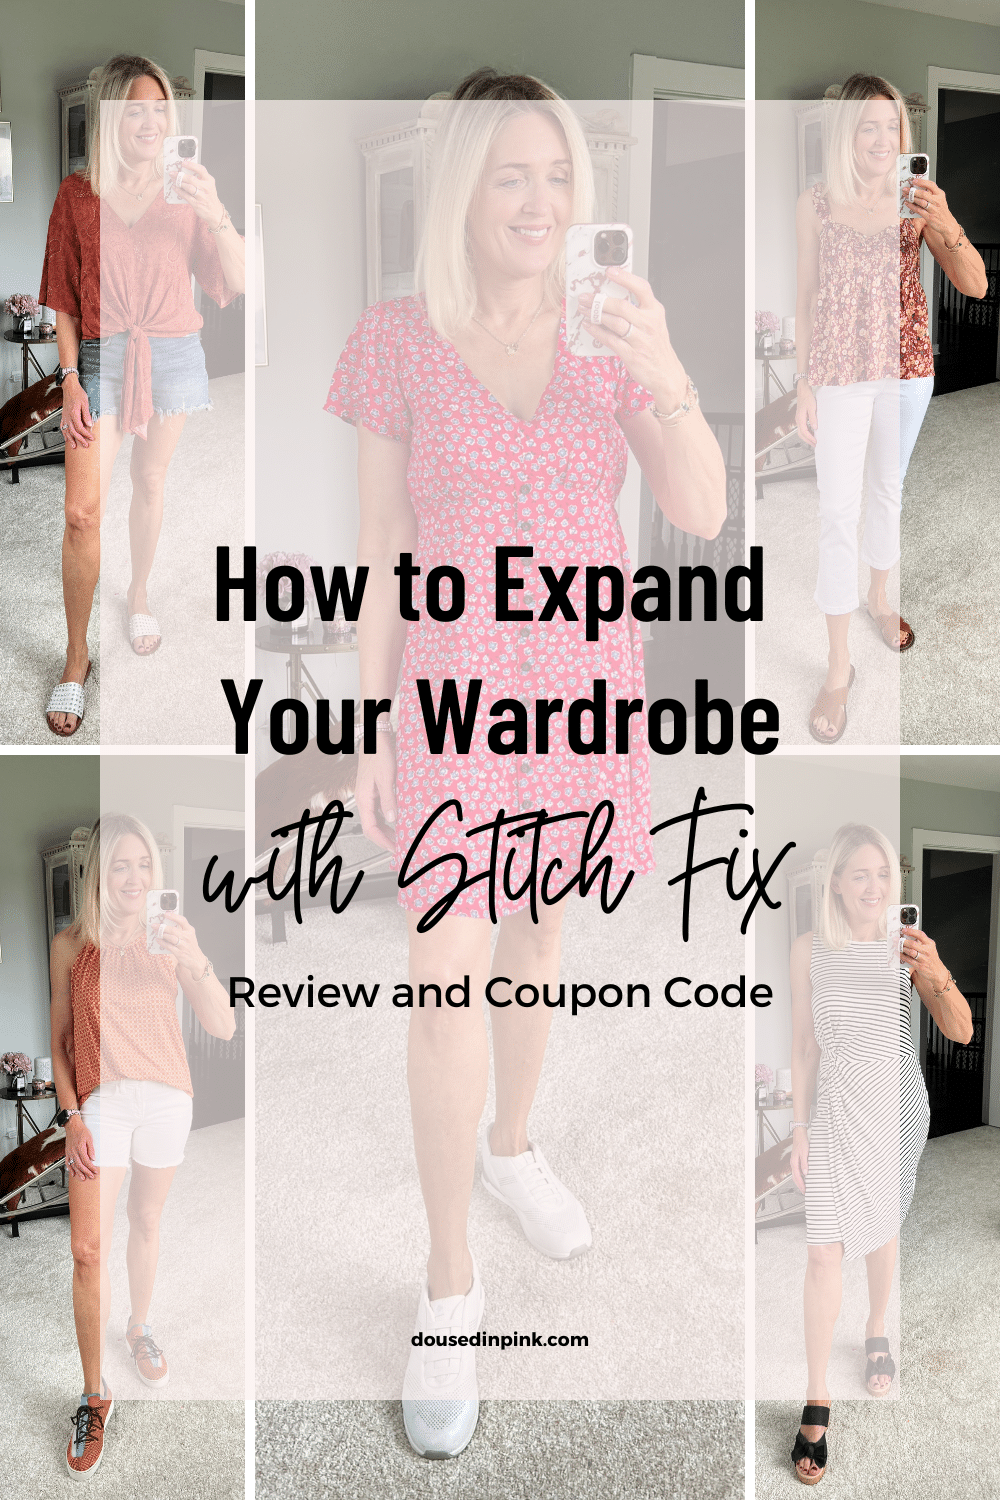 Stitch Fix Review for Summer 2020 - Stories of Our Boys